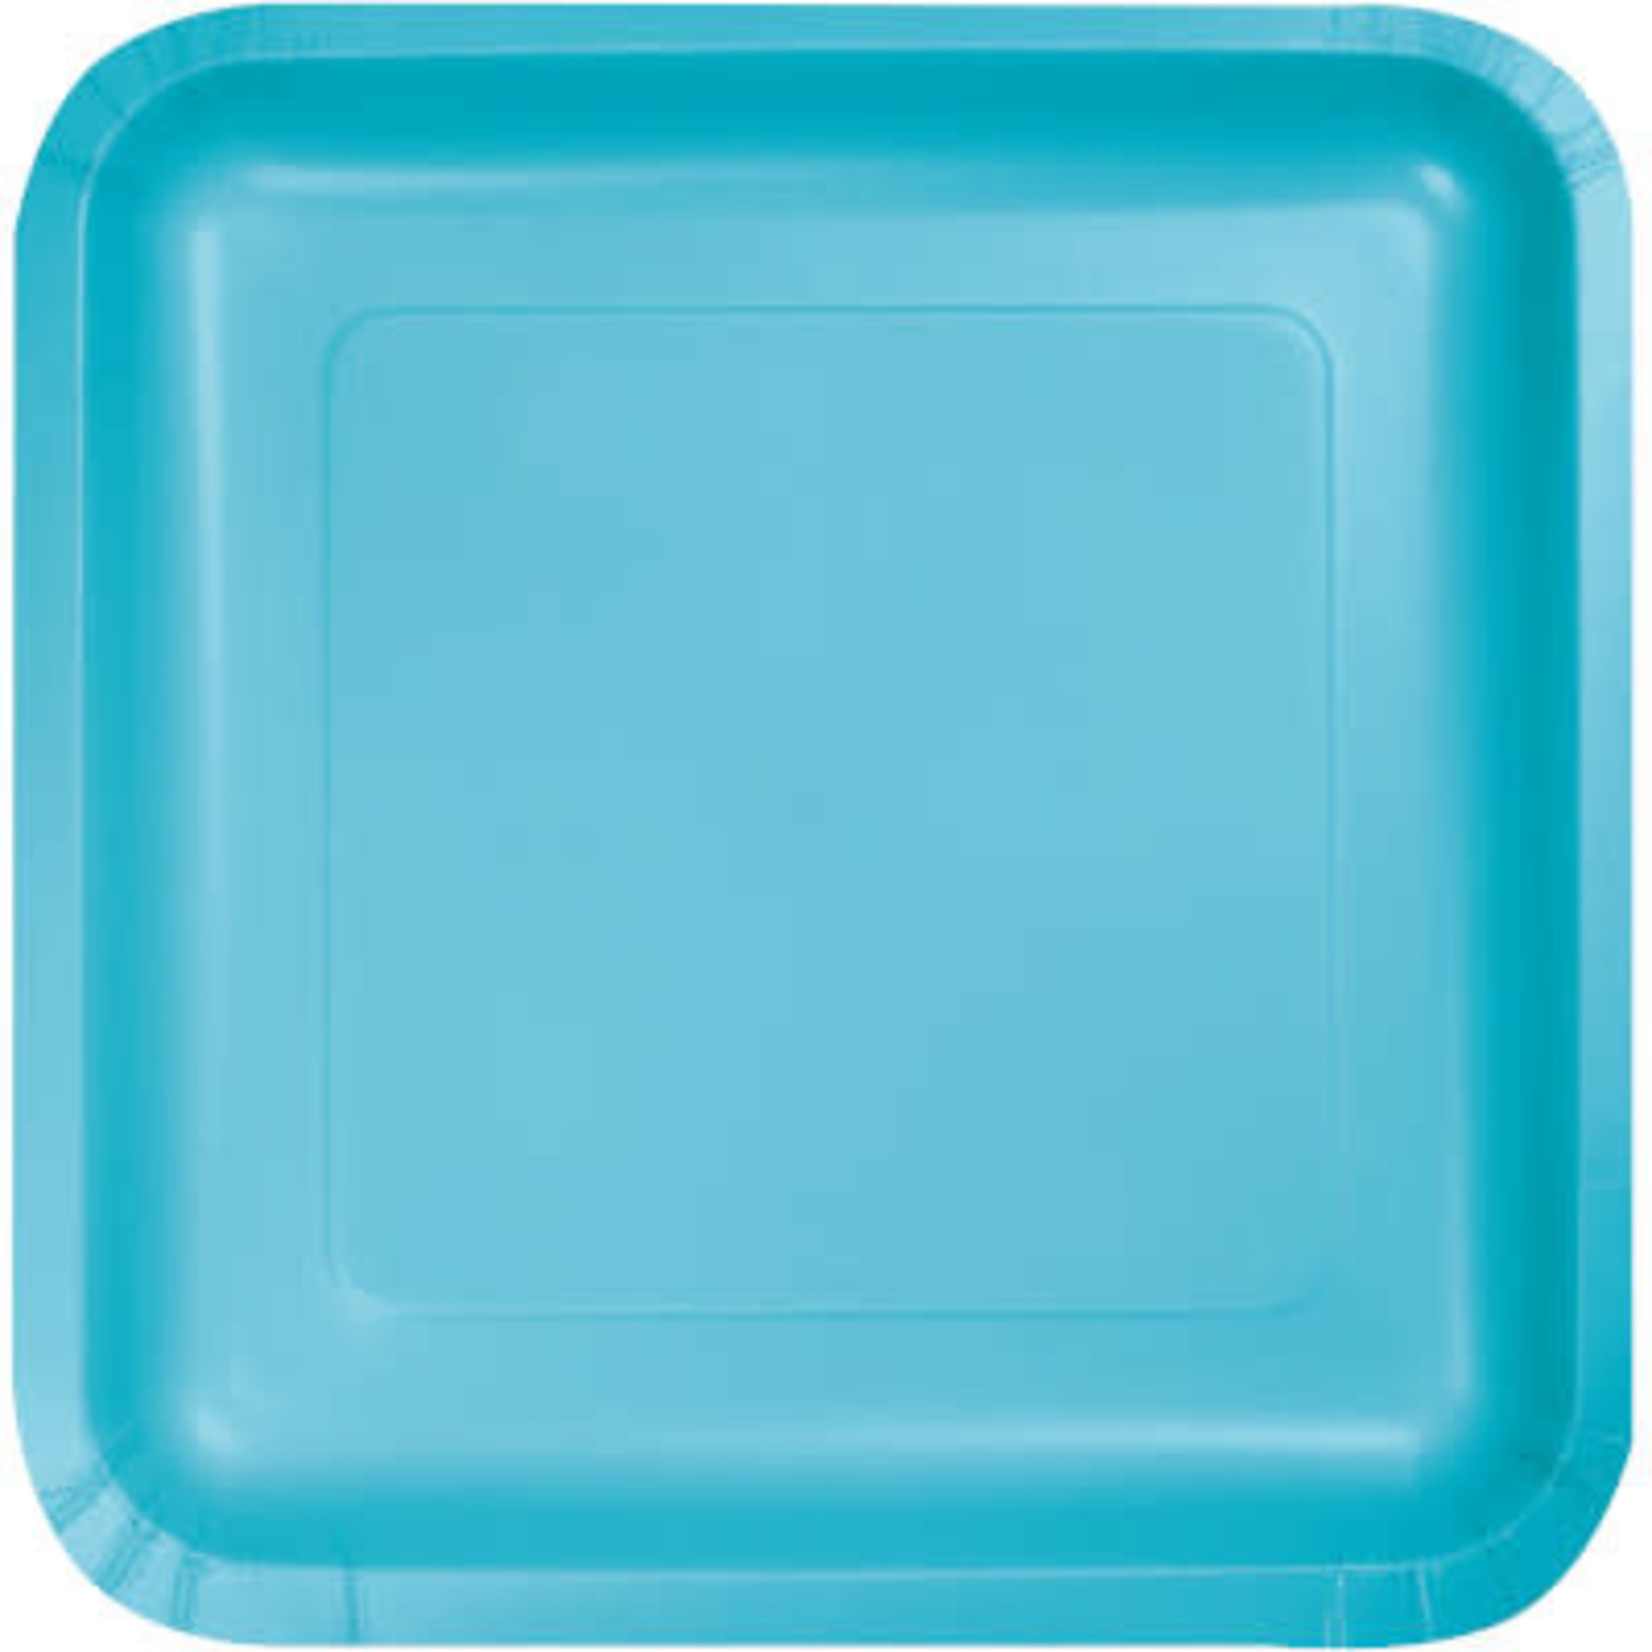 Touch of Color 7" Bermuda Blue Square Plates - 18ct.